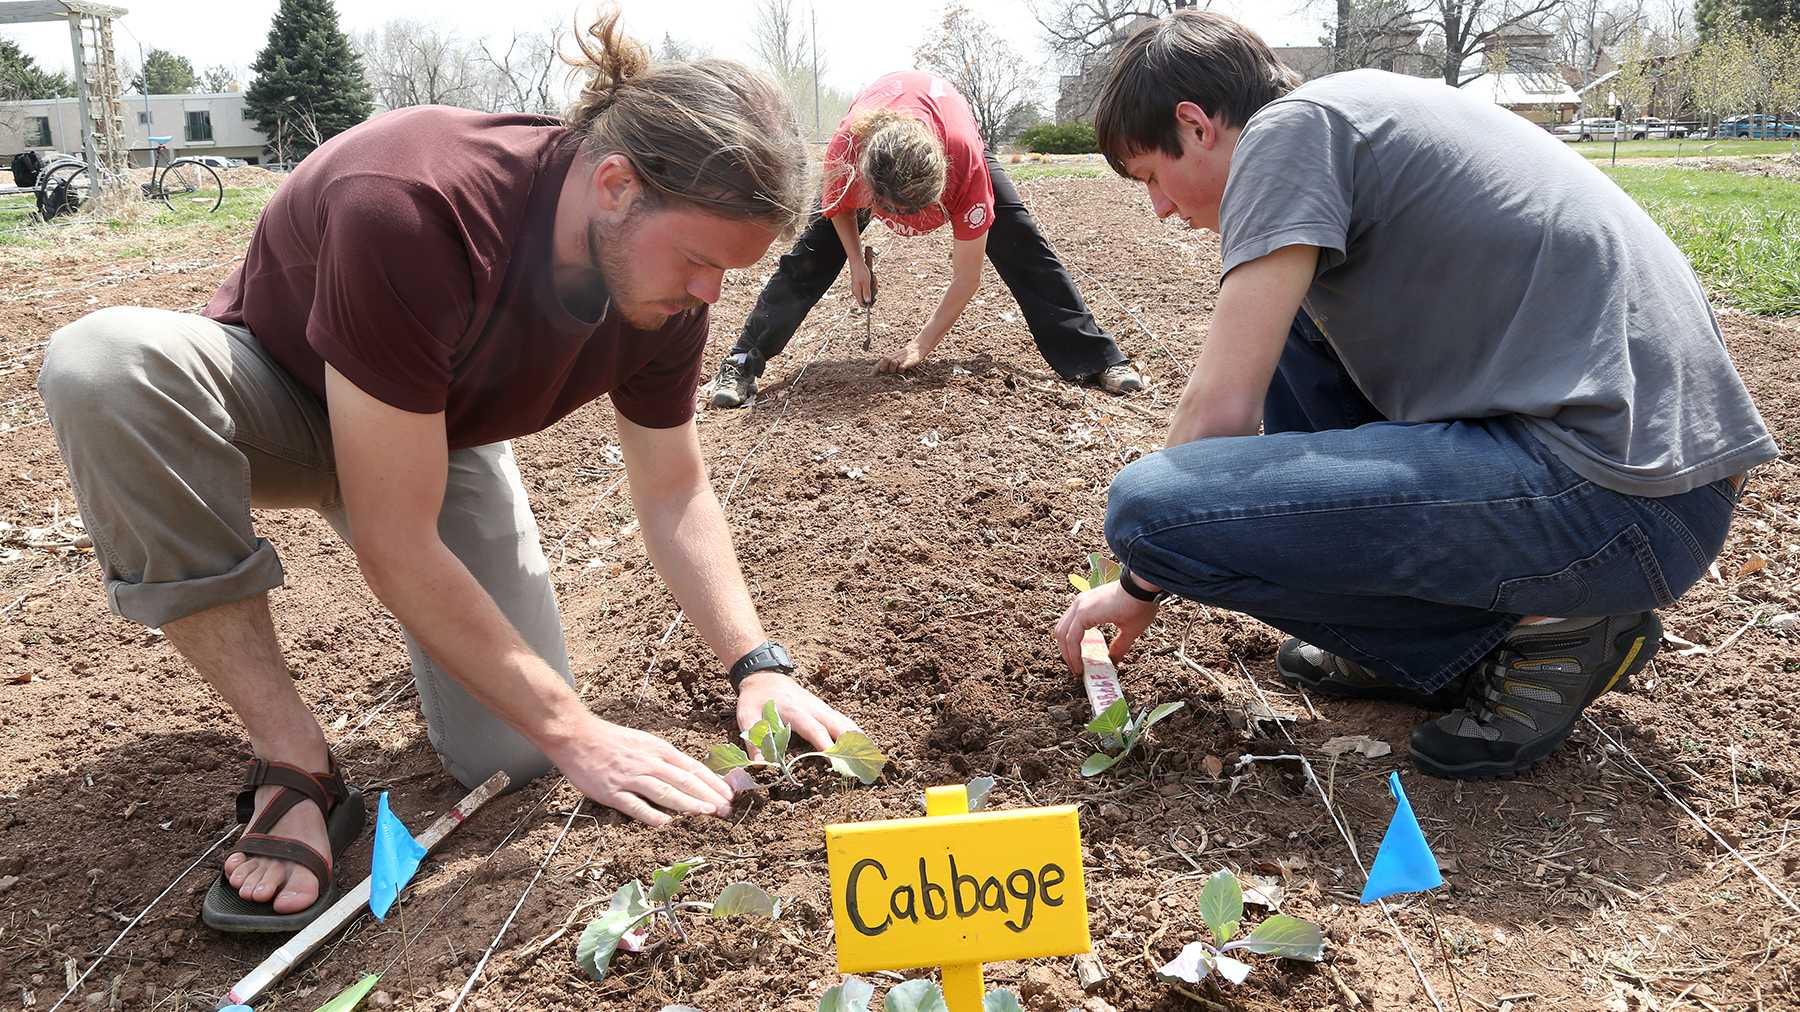 Junior wildlife biology major Brent Pease, left, Agriculture graduate student Amy Kousch, center, and sophmore soil and crop science major Colton Heeney plant cabbage in the student sustainable farm yesterday afternoon. The student run farm grows a variety of fruits, vegtables and other plants and has done so for the last 16 growing seasons.